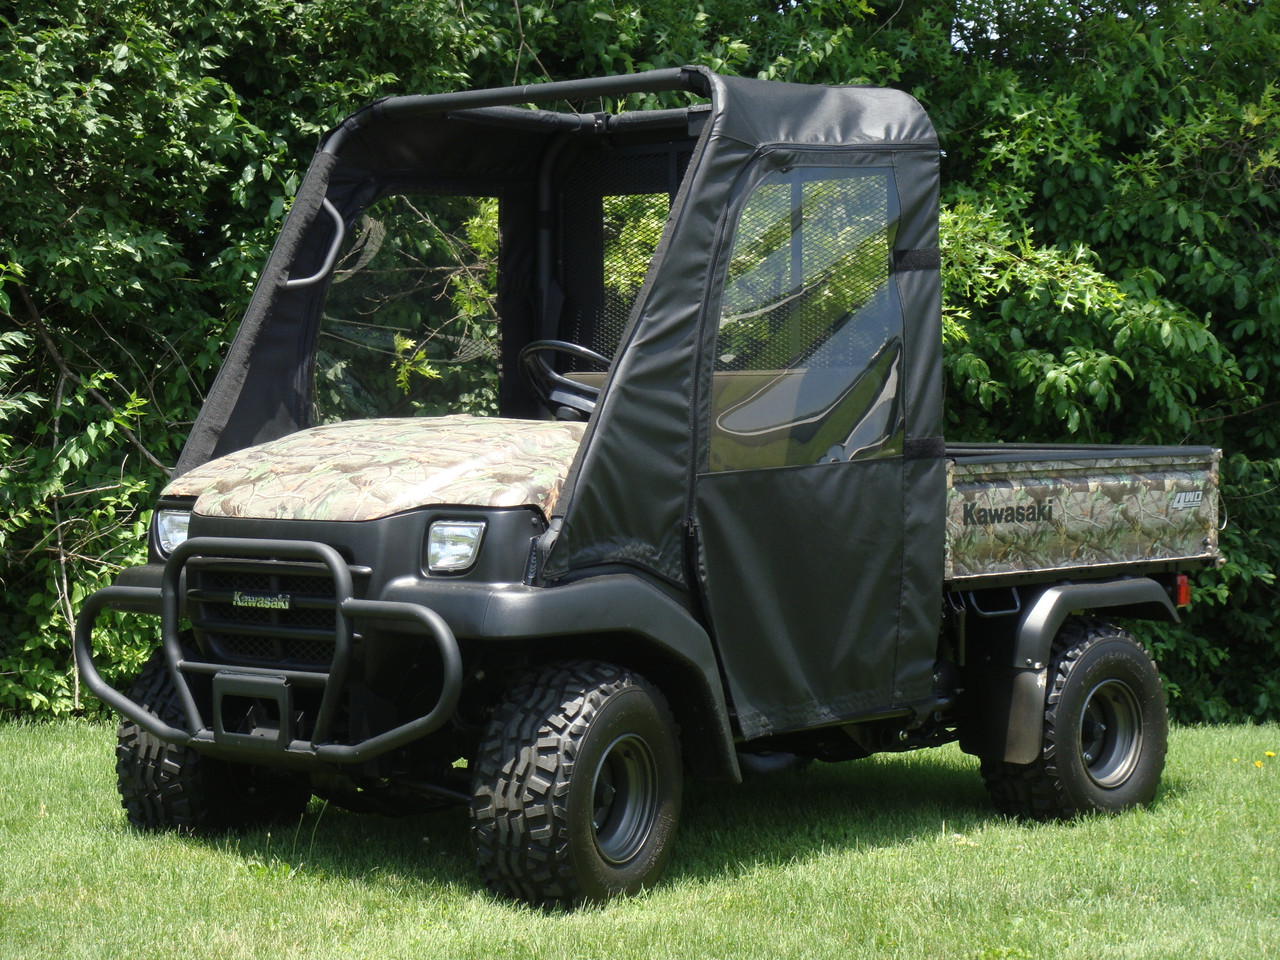 3 Star side x side Kawasaki Mule 3000/3010 soft doors front and side angle view